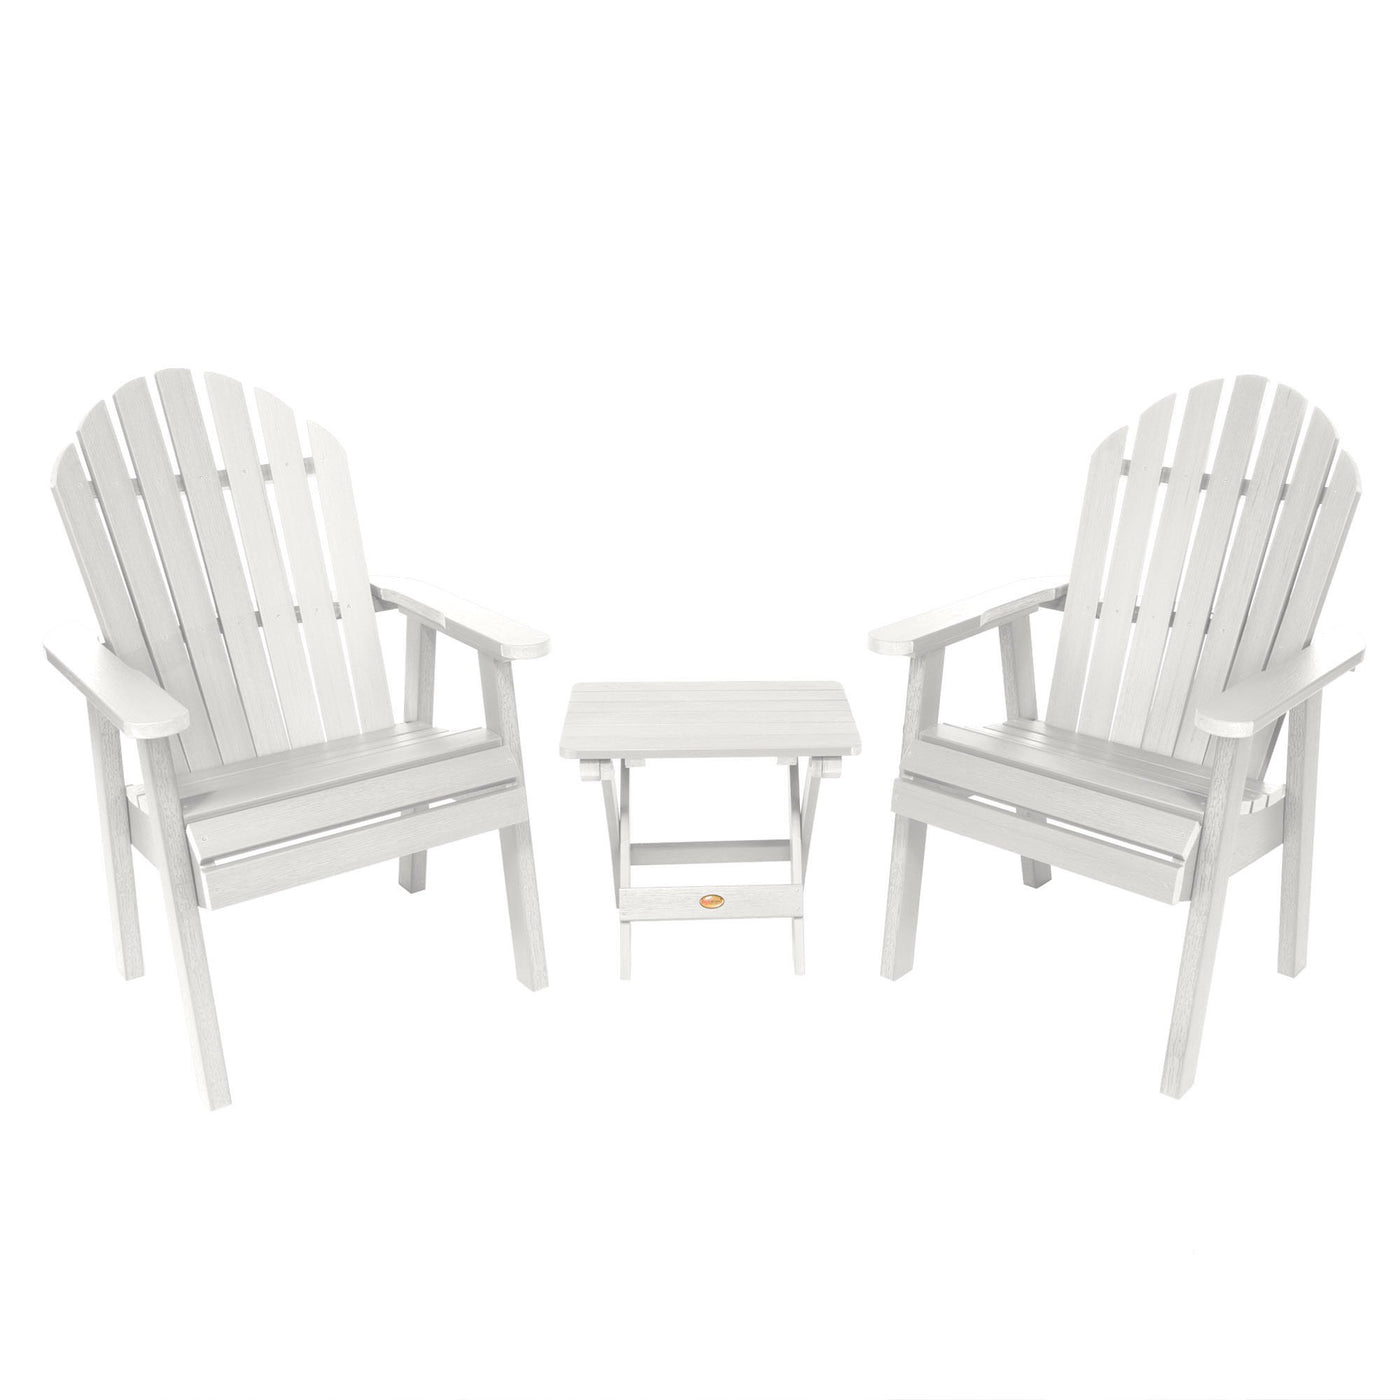 2 Hamilton Deck Chairs with Folding Side Table Highwood USA White 